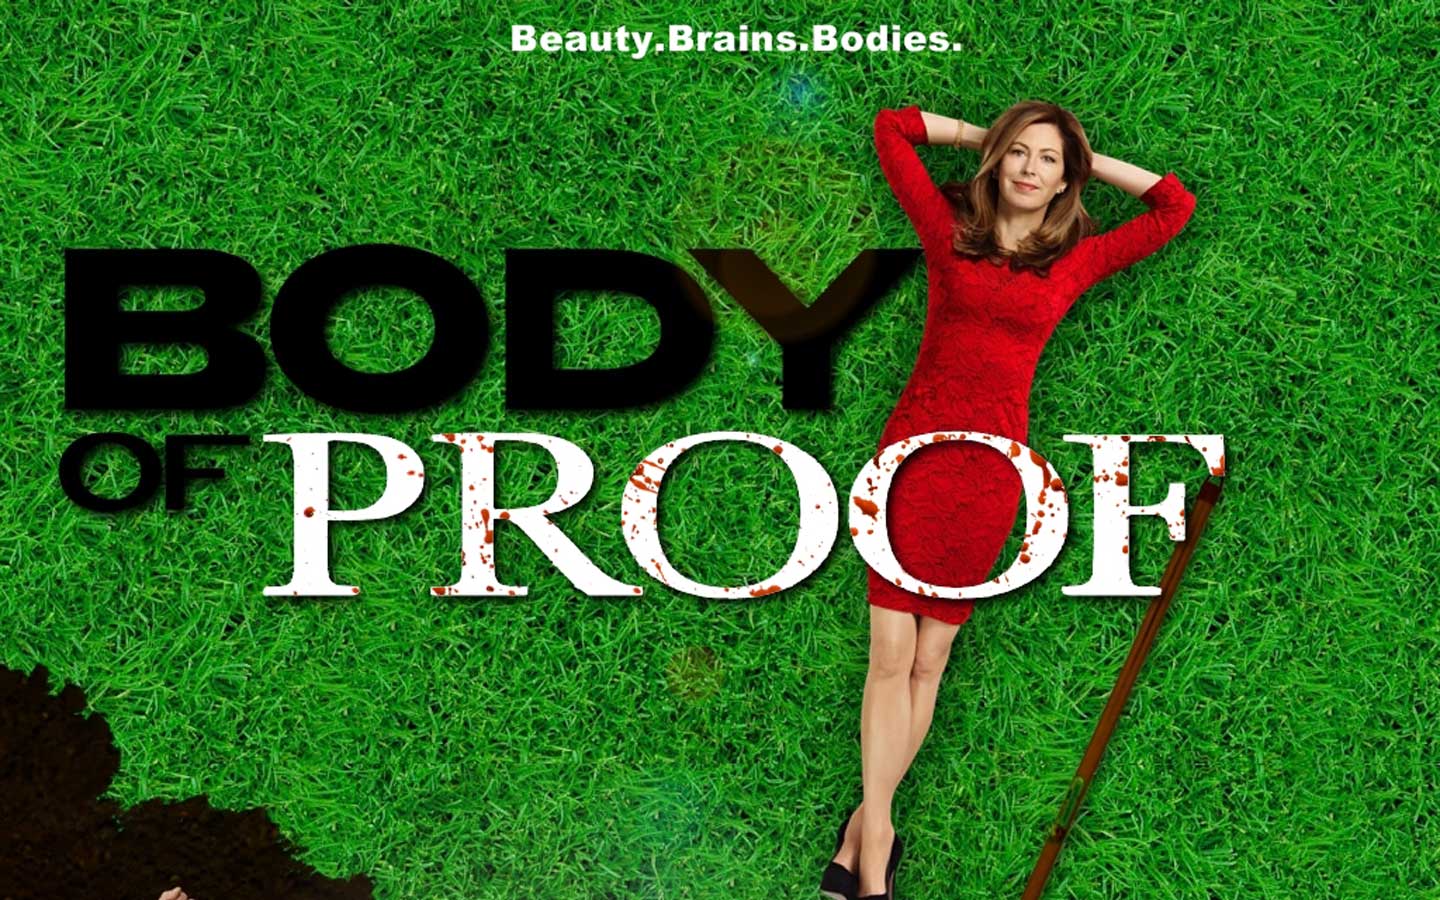 Body Of Proof Wallpapers